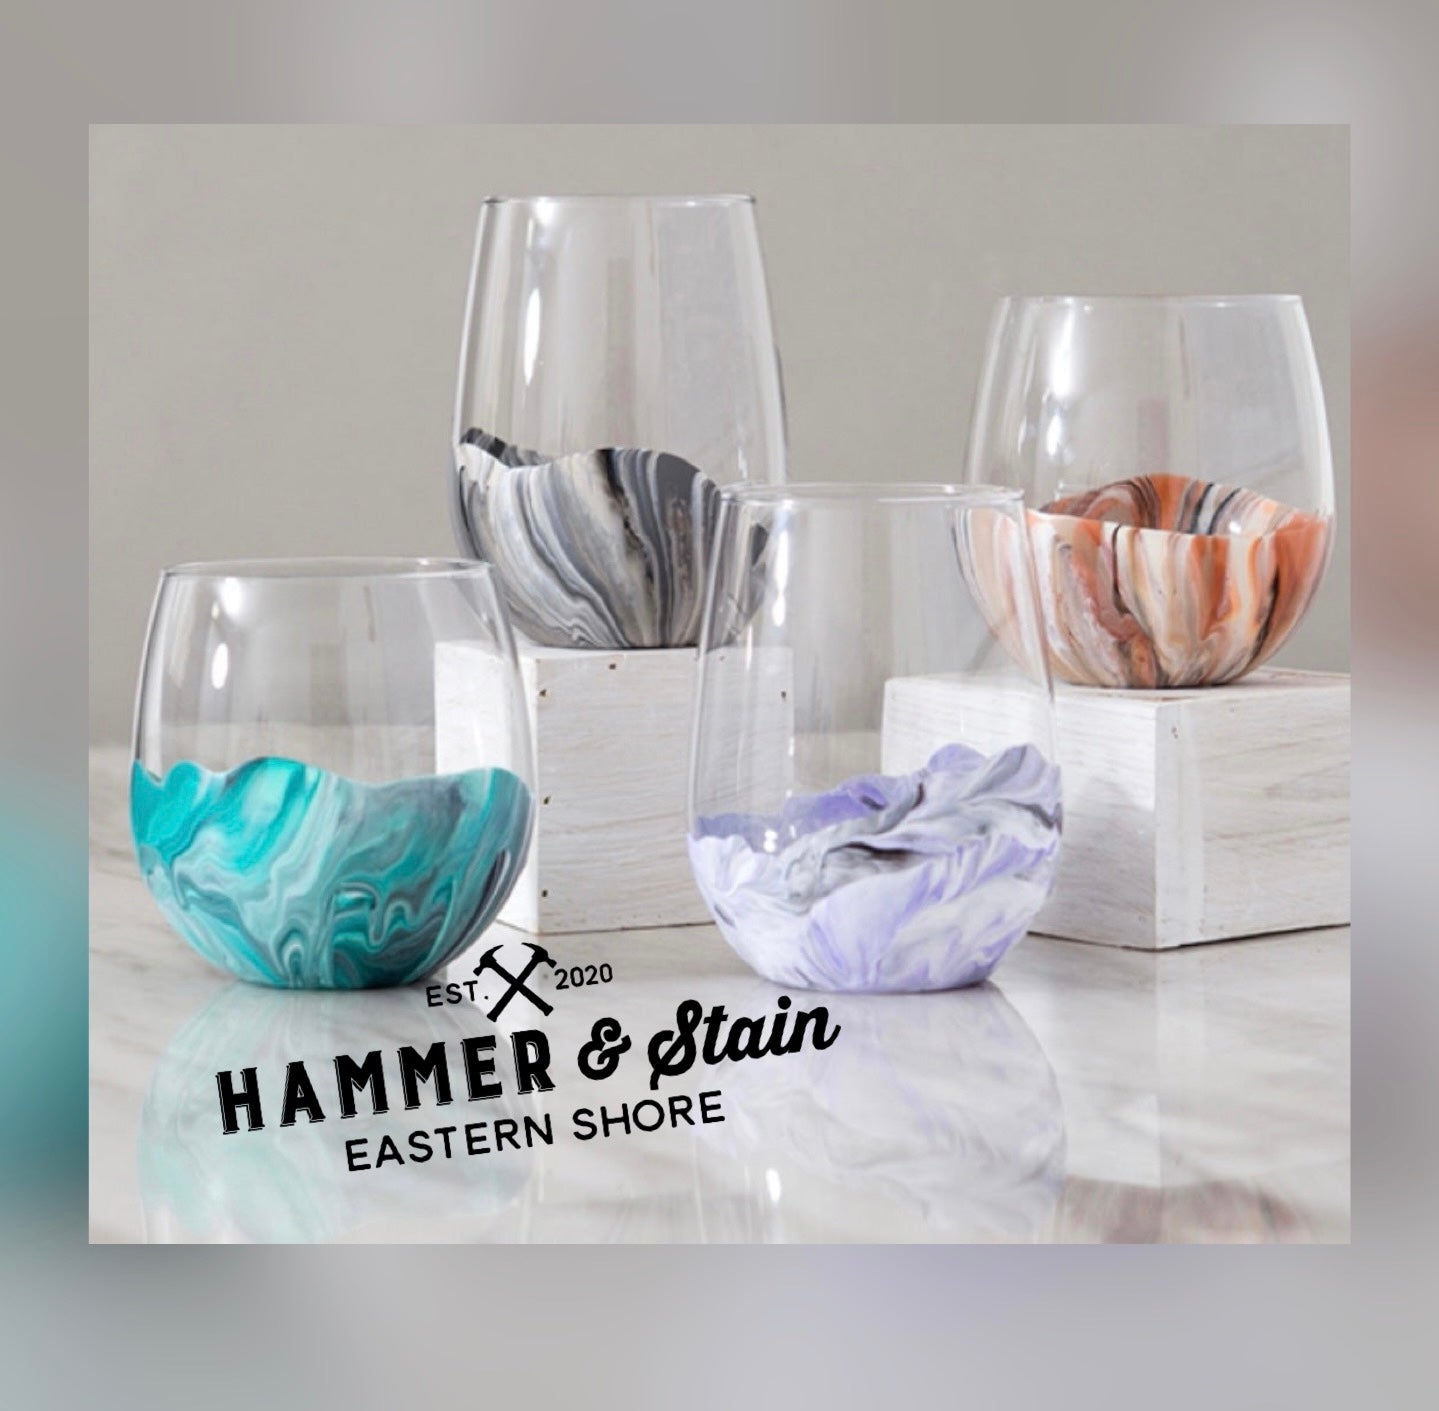 03/10/24 Sunday 3:00 PM CVL Girls Night Marble Dipped Glass Event